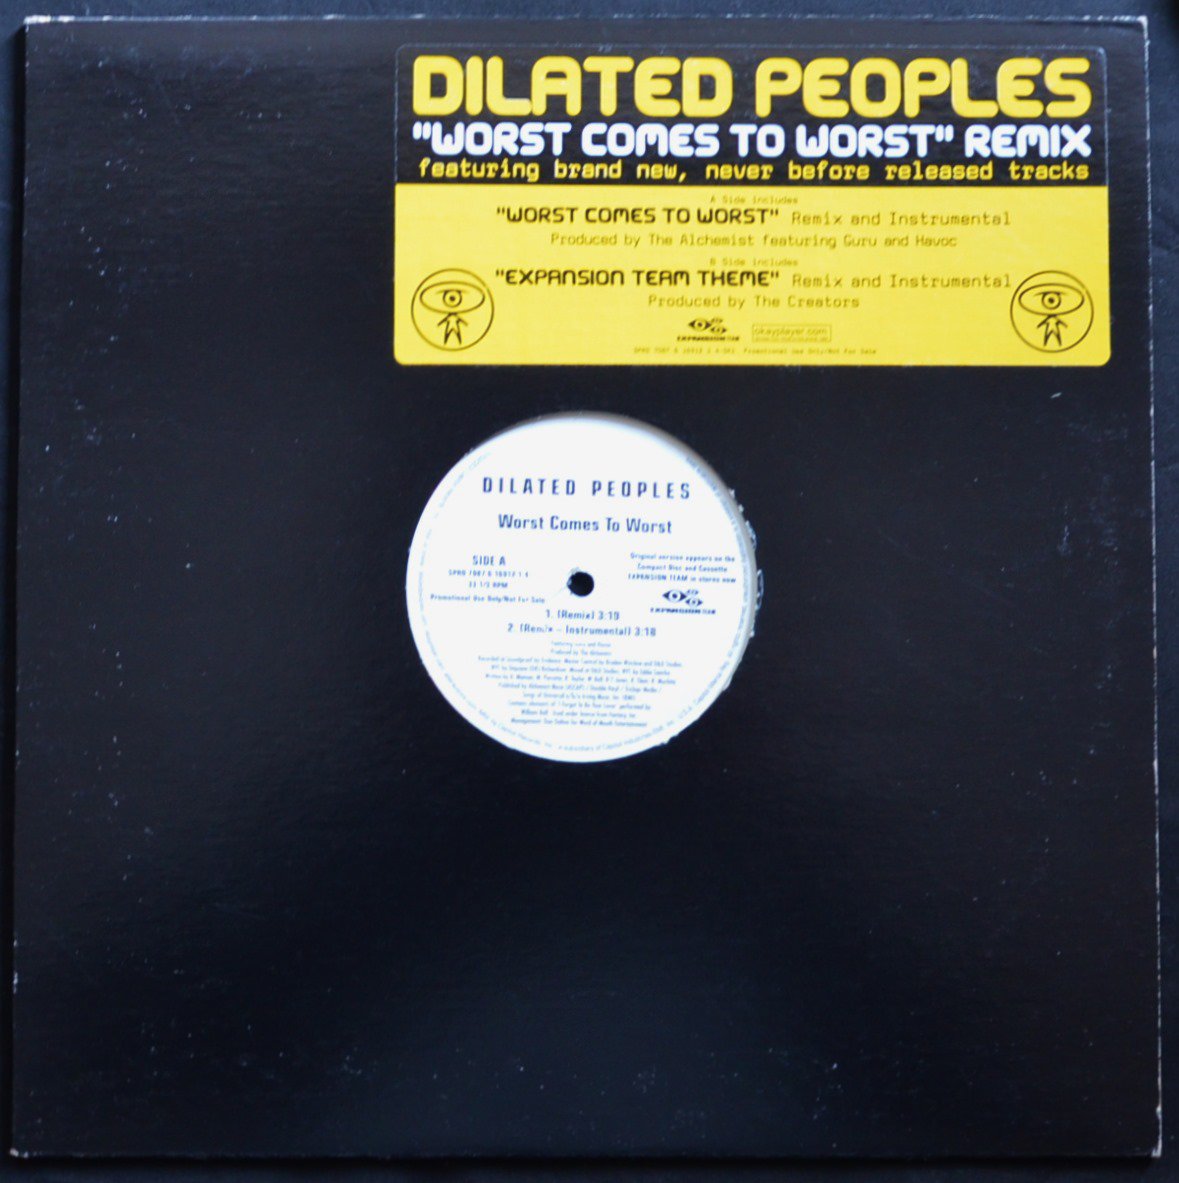 DILATED PEOPLES / WORST COMES TO WORST (REMIX) / EXPANSION TEAM THEME (REMIX) (12